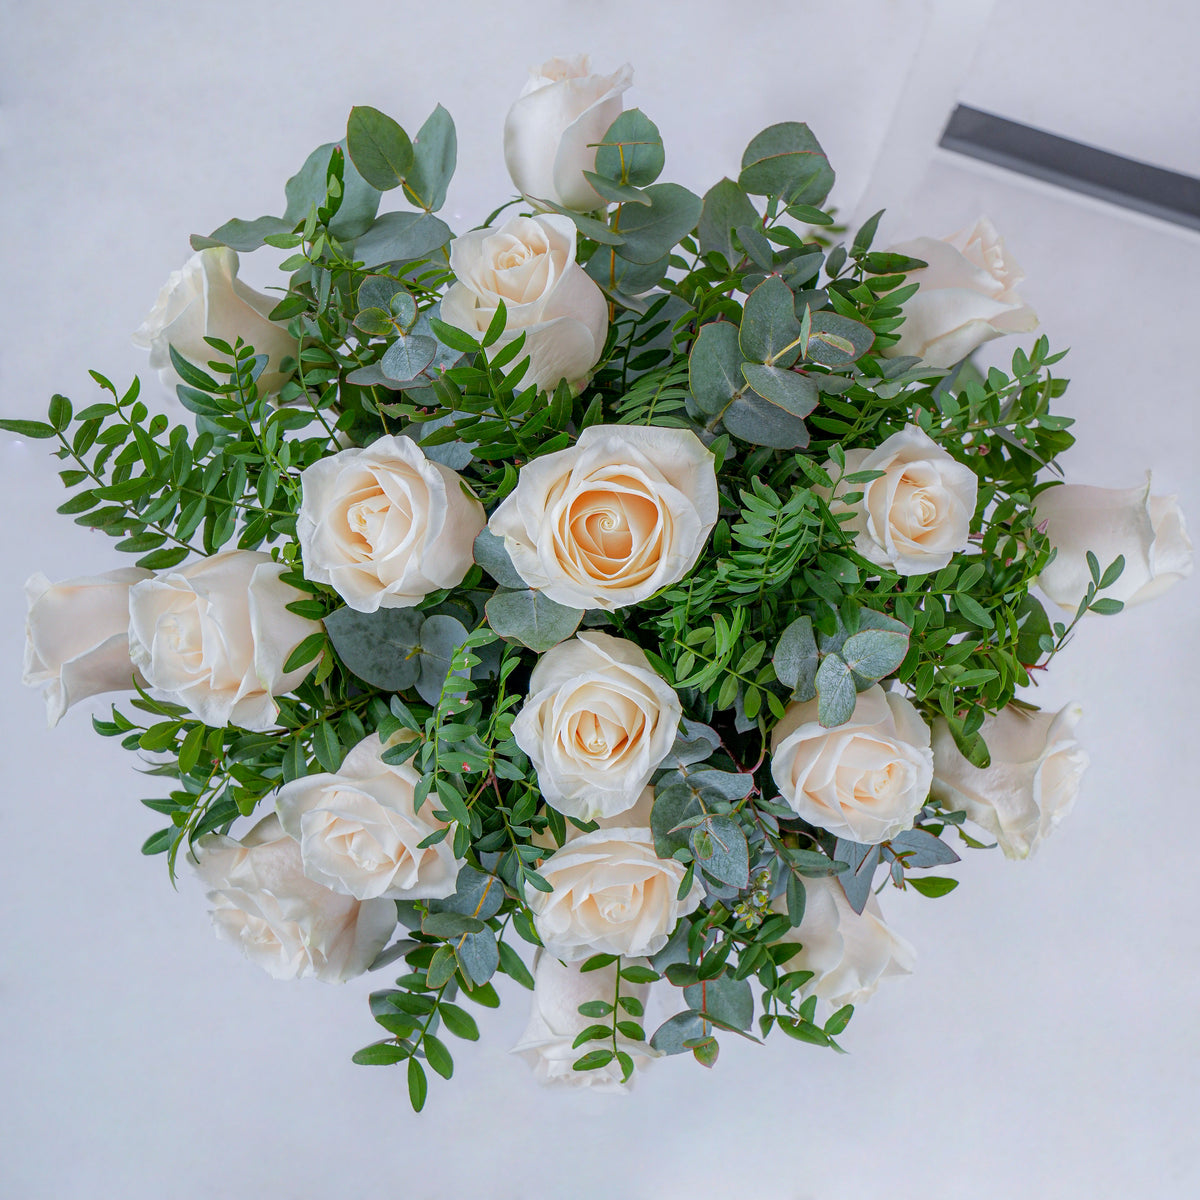 White Roses with greens